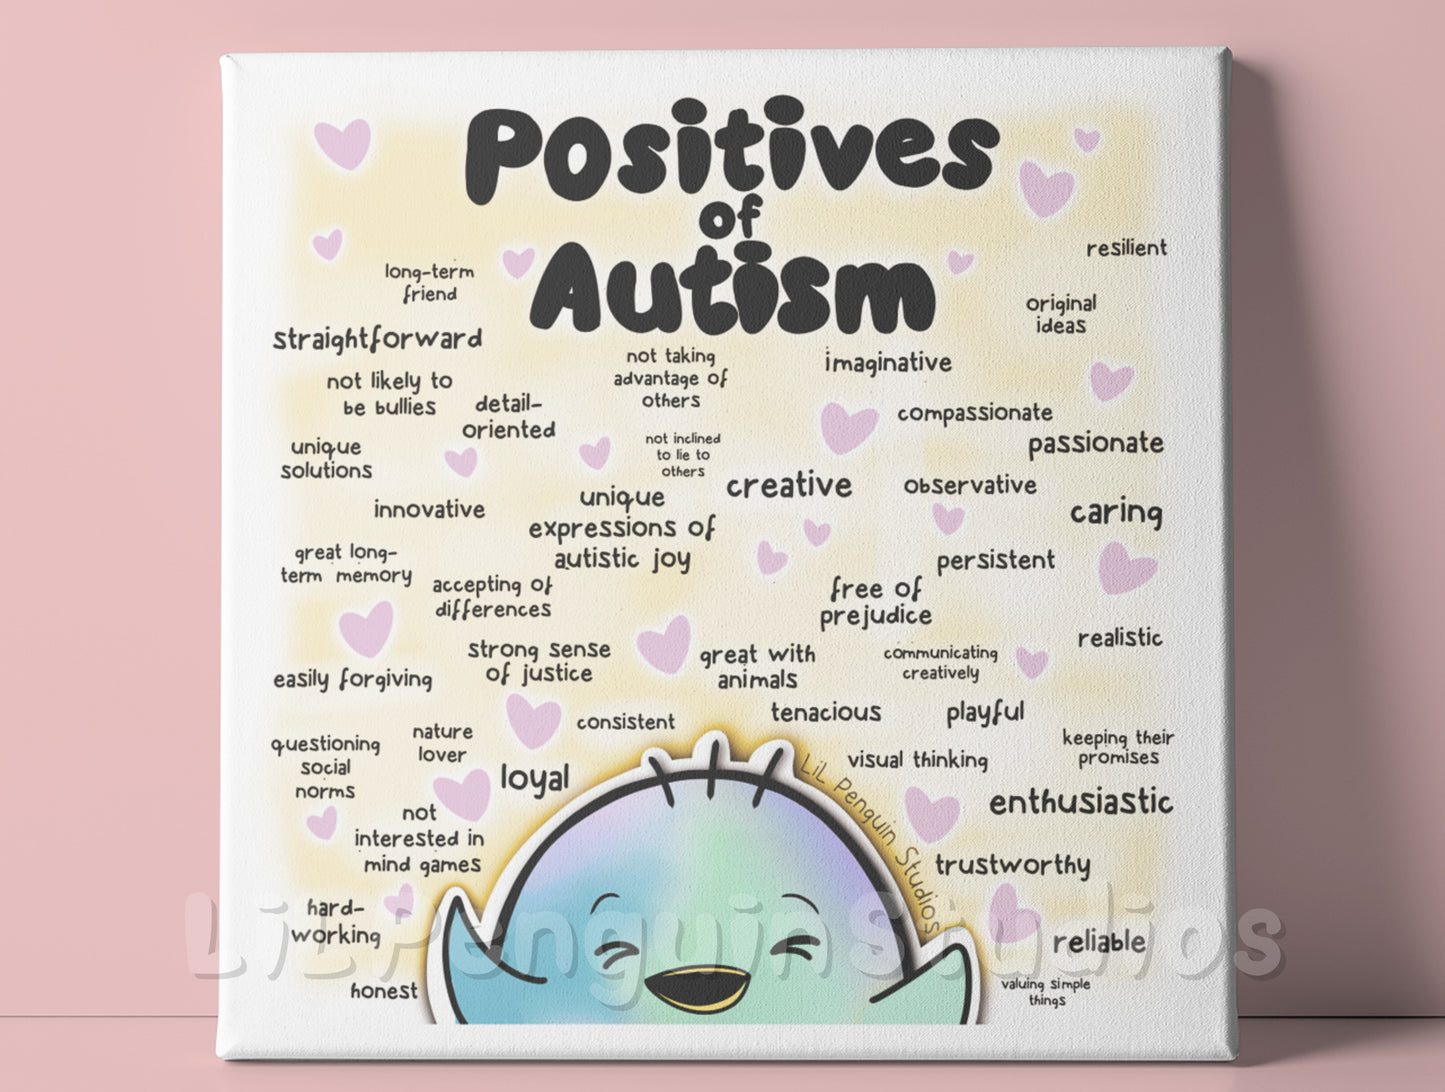 Positives oF Autism poster hand drawn by an autistic artist. 